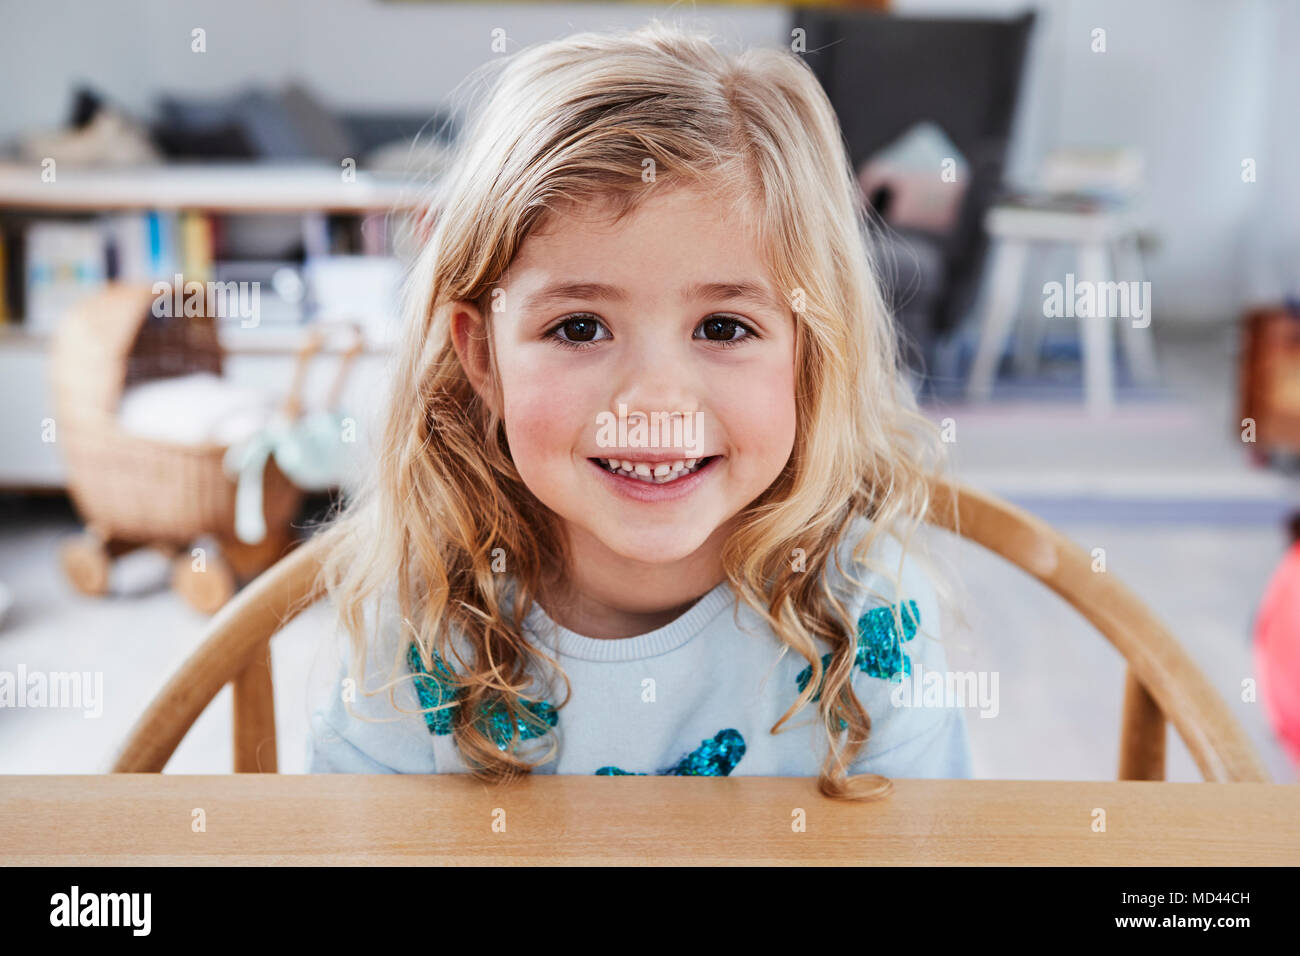 Portrait of young girl, sitting at table, smiling Stock Photo